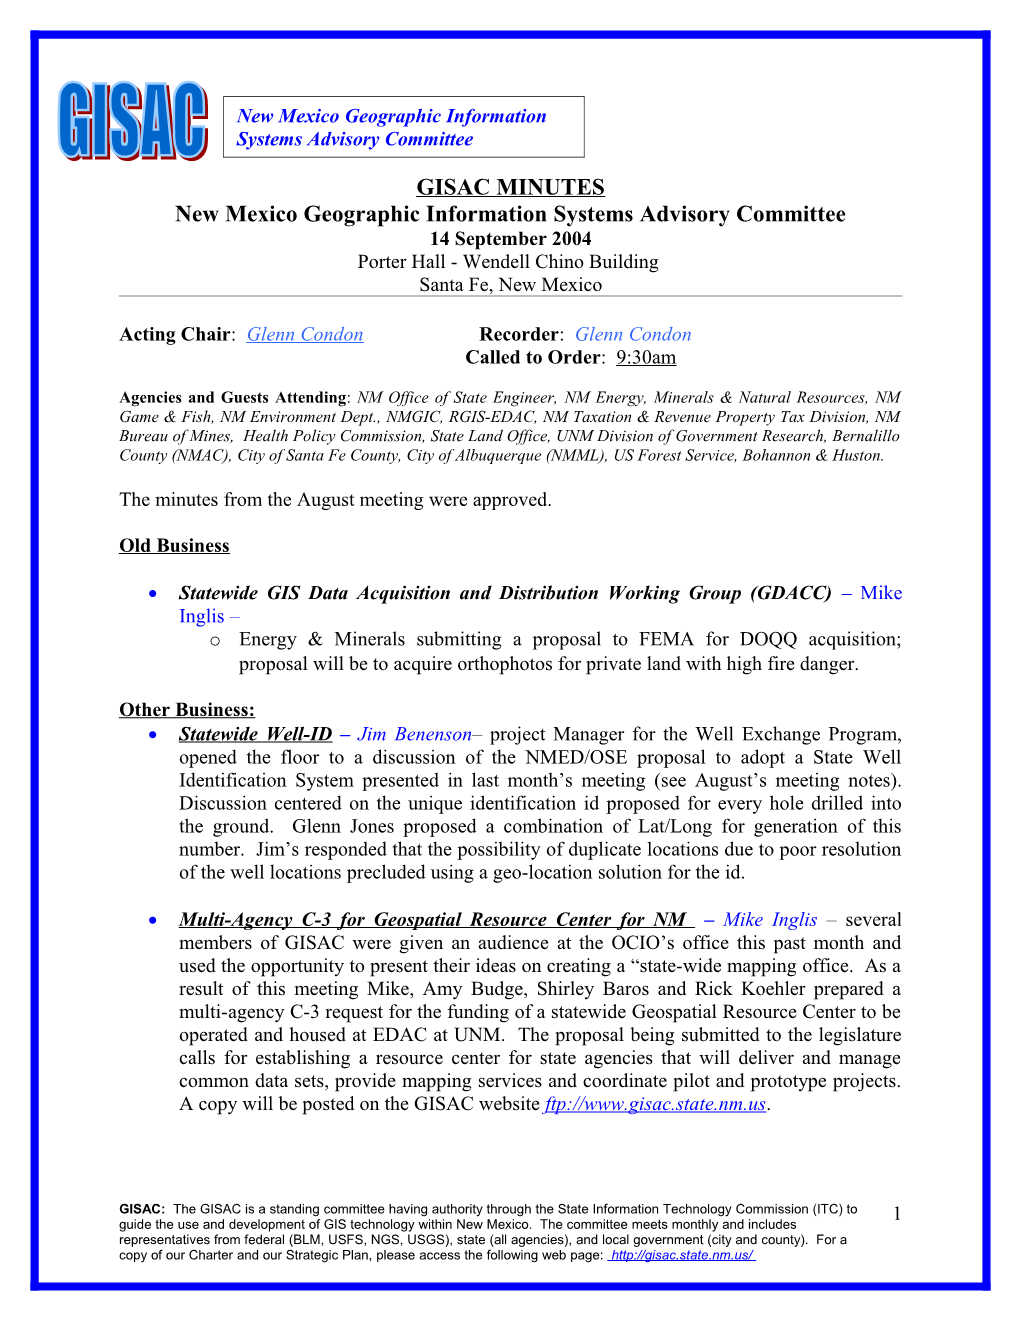 New Mexico Geographic Information System Advisory Committee